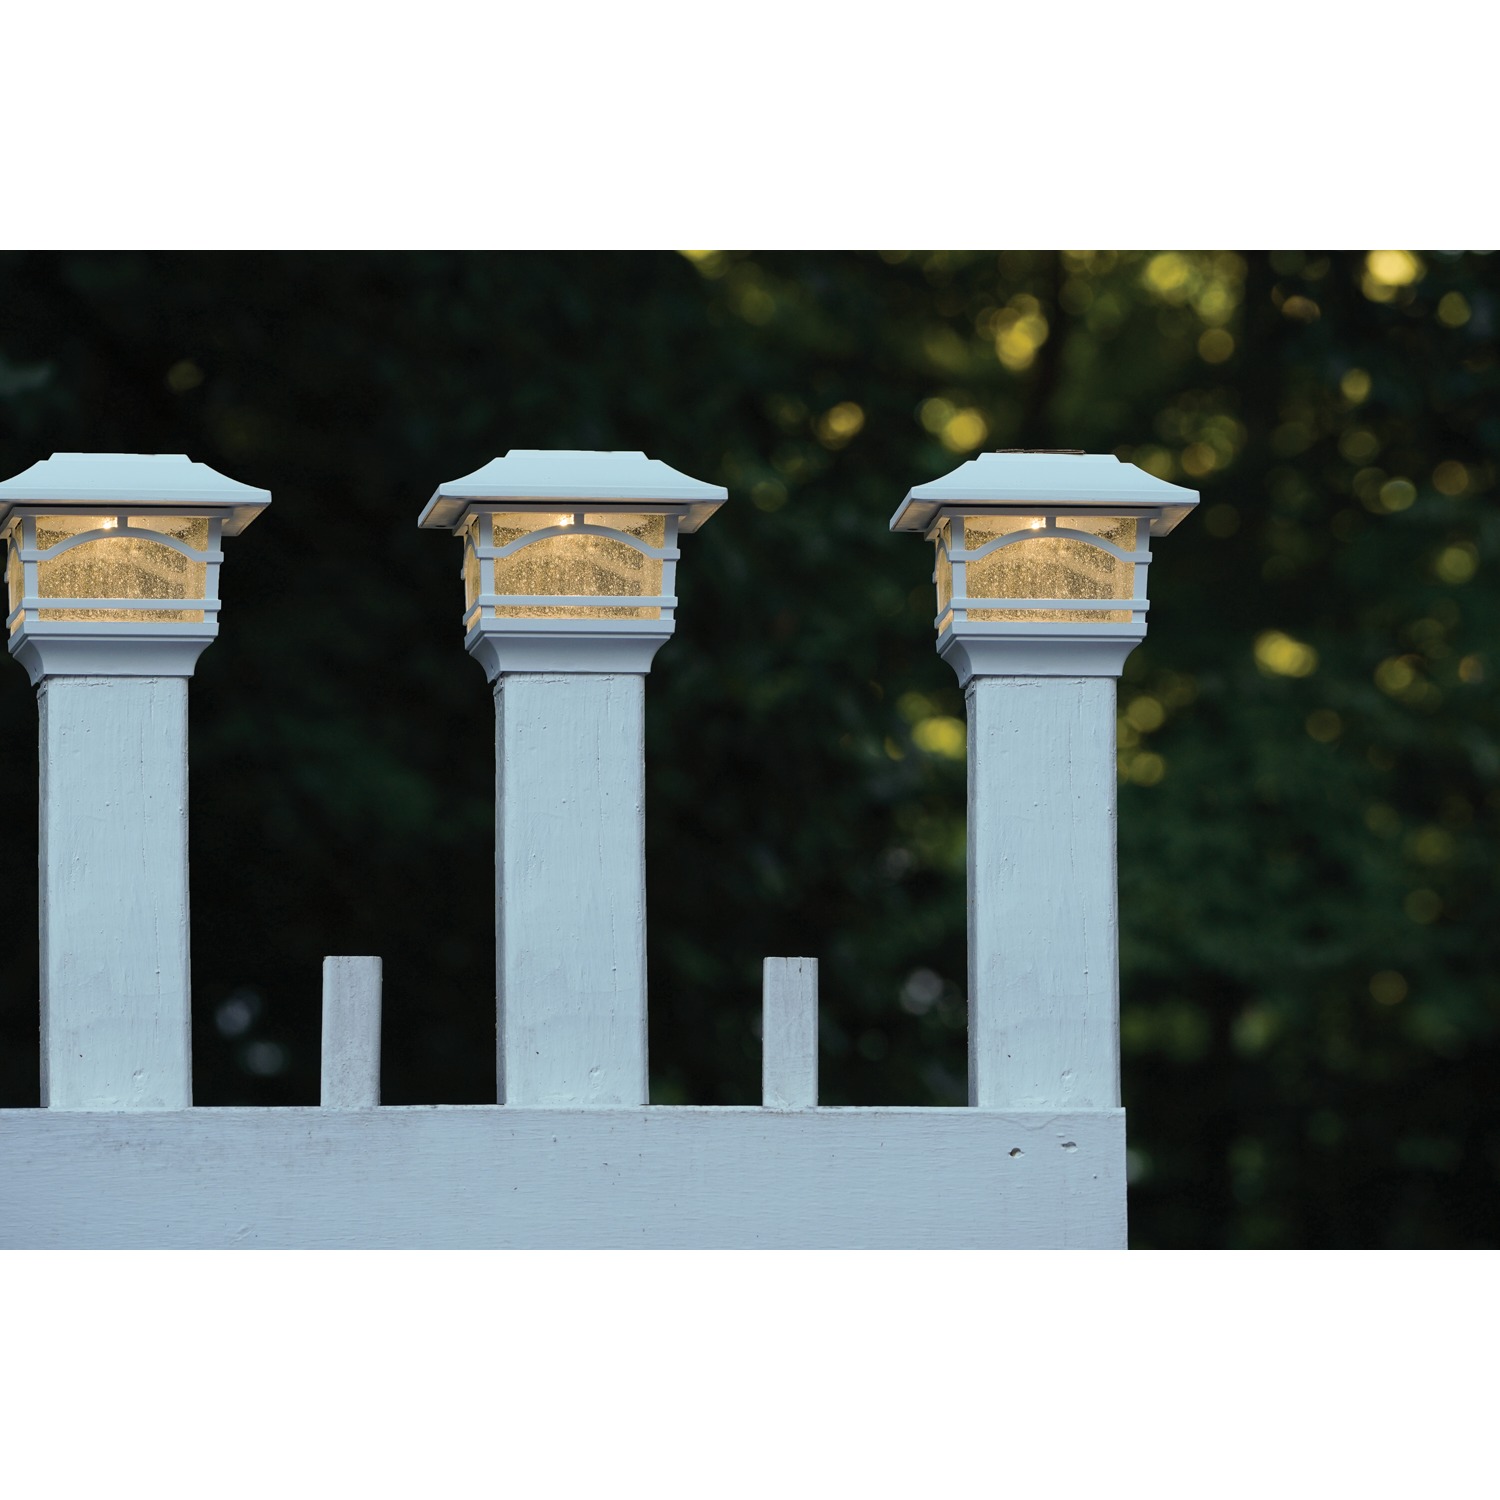 Maxsa® Innovations Maxsa Innovations 41971 Solar Post Cap And Deck Railing Lights 2 Pack (White) - image 3 of 3